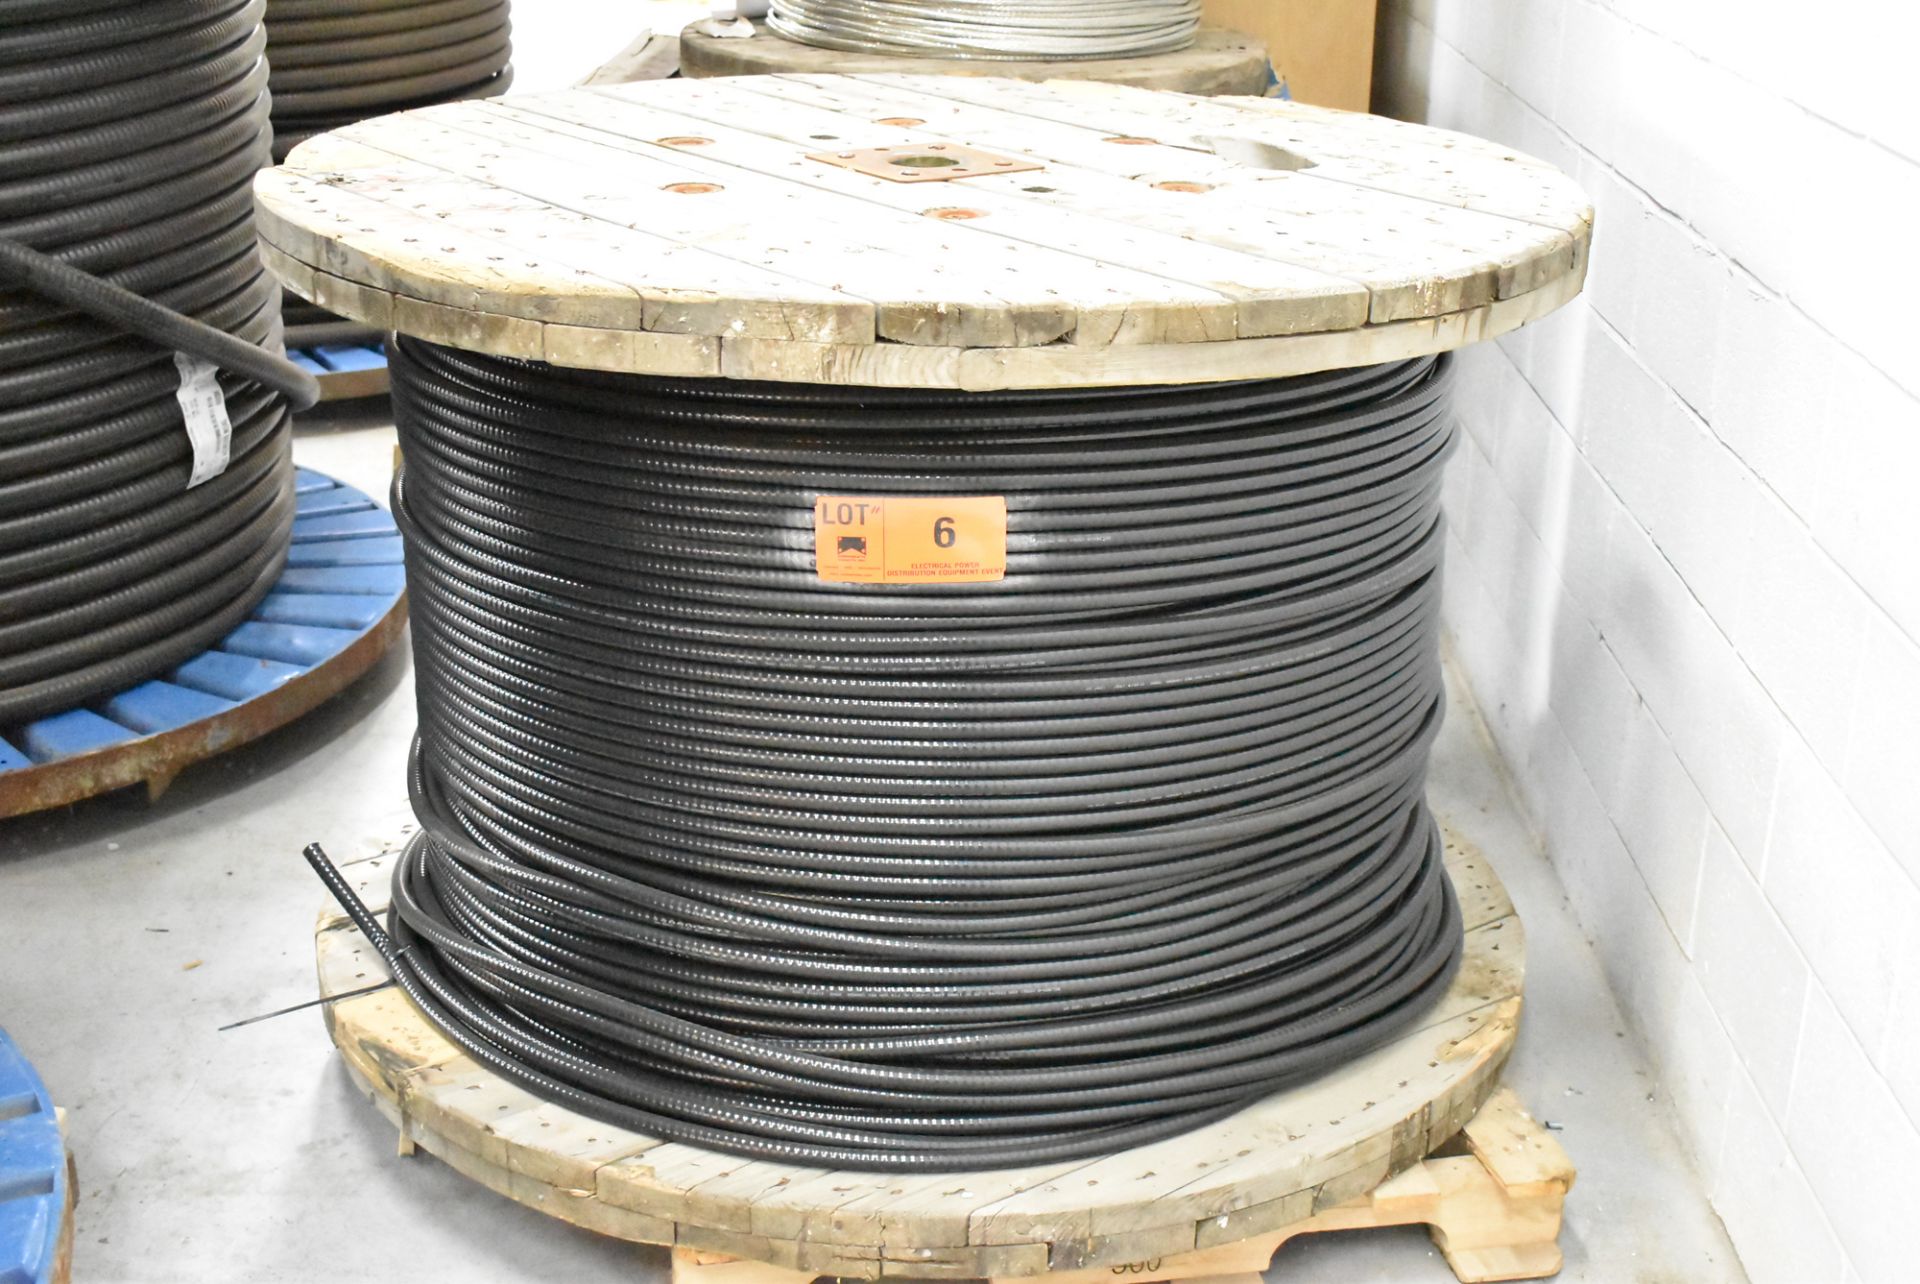 LOT/ SPOOL OF WESTBURNE (4) COPPER CONDUCTOR METAL CLAD ELECTRICAL CABLE WITH REEL (CI) (LOCATED